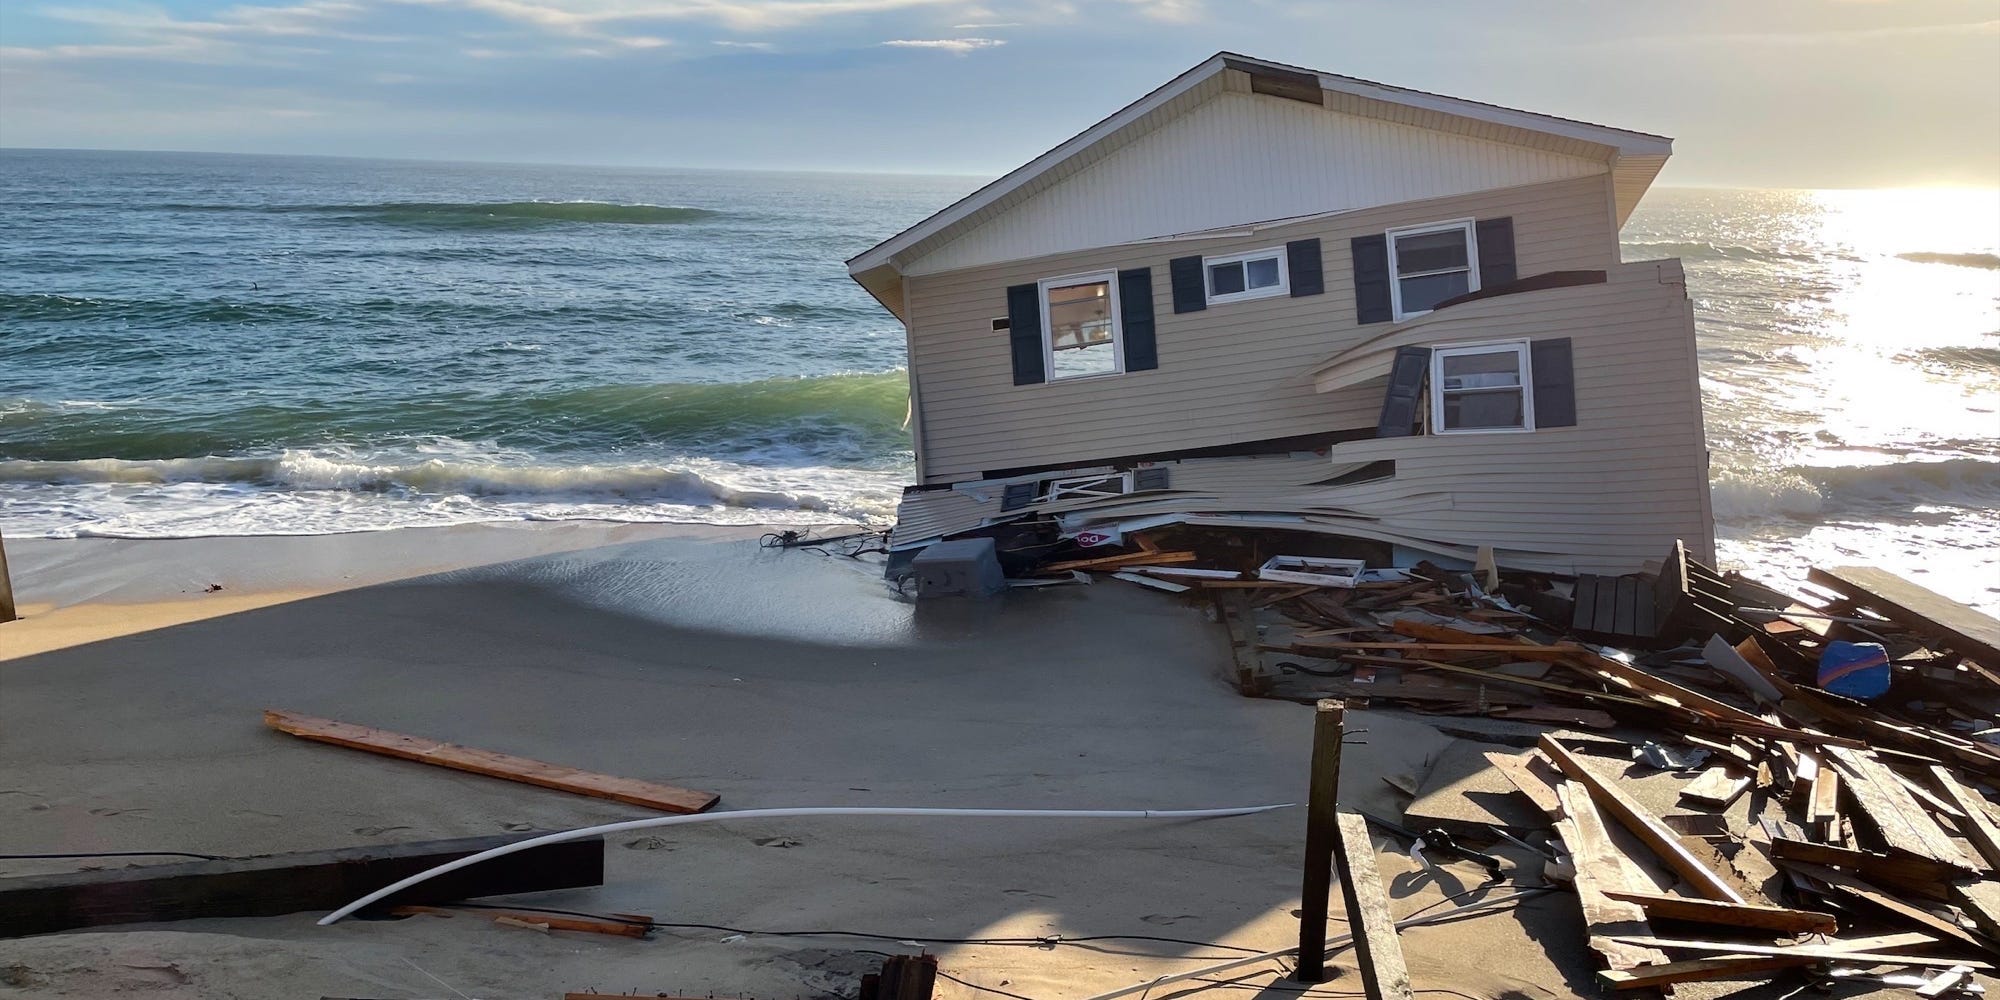 The collapsed beachfront home located at 24183 Ocean Drive, Rodanthe.